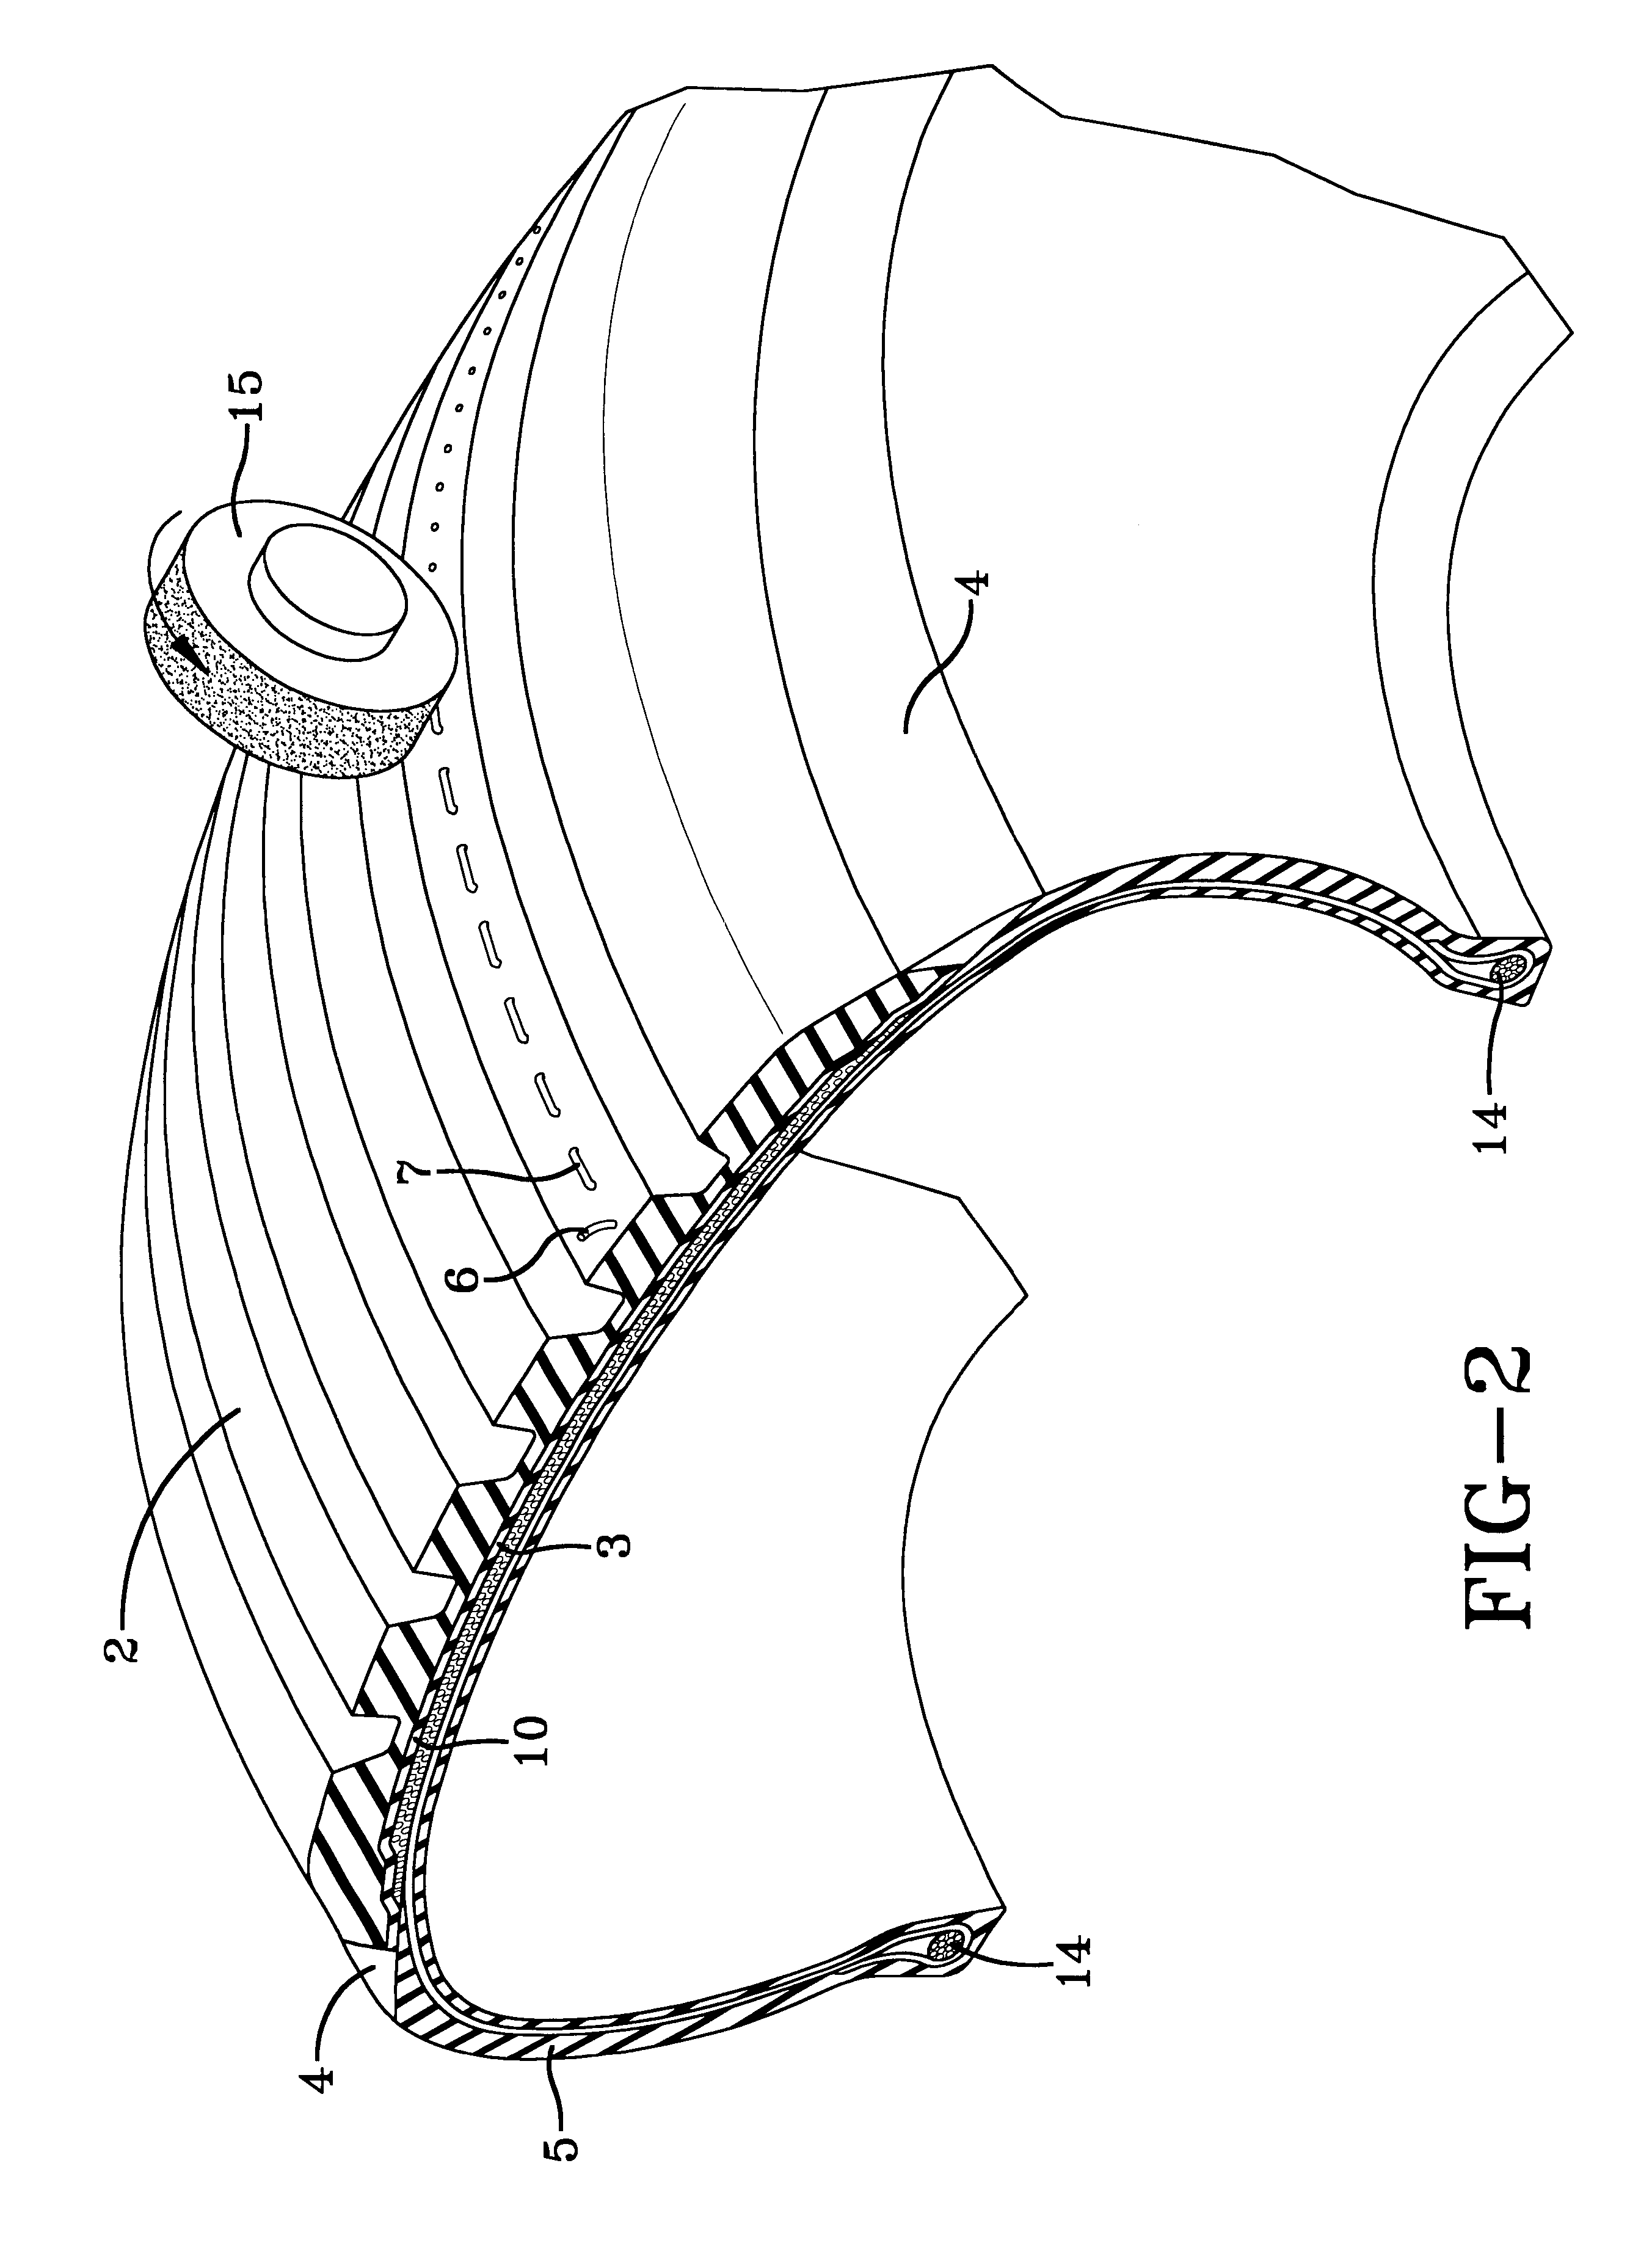 Tire with tread containing electrically conductive stitched thread